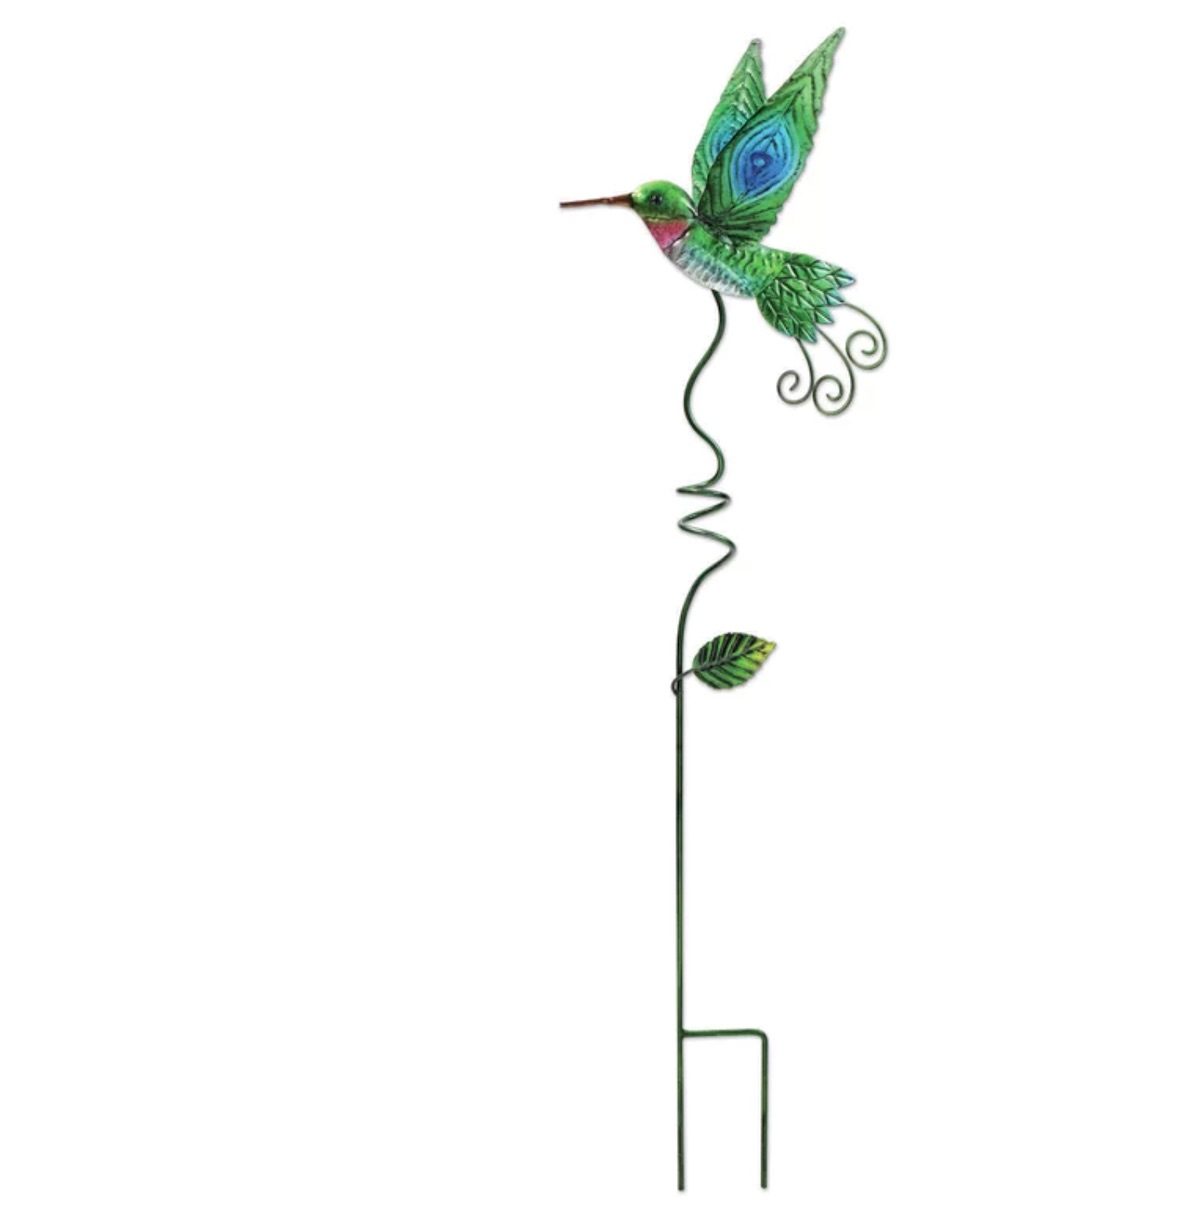 18 Hummingbird Decor Items for Homes and Gardens - Birds and Blooms